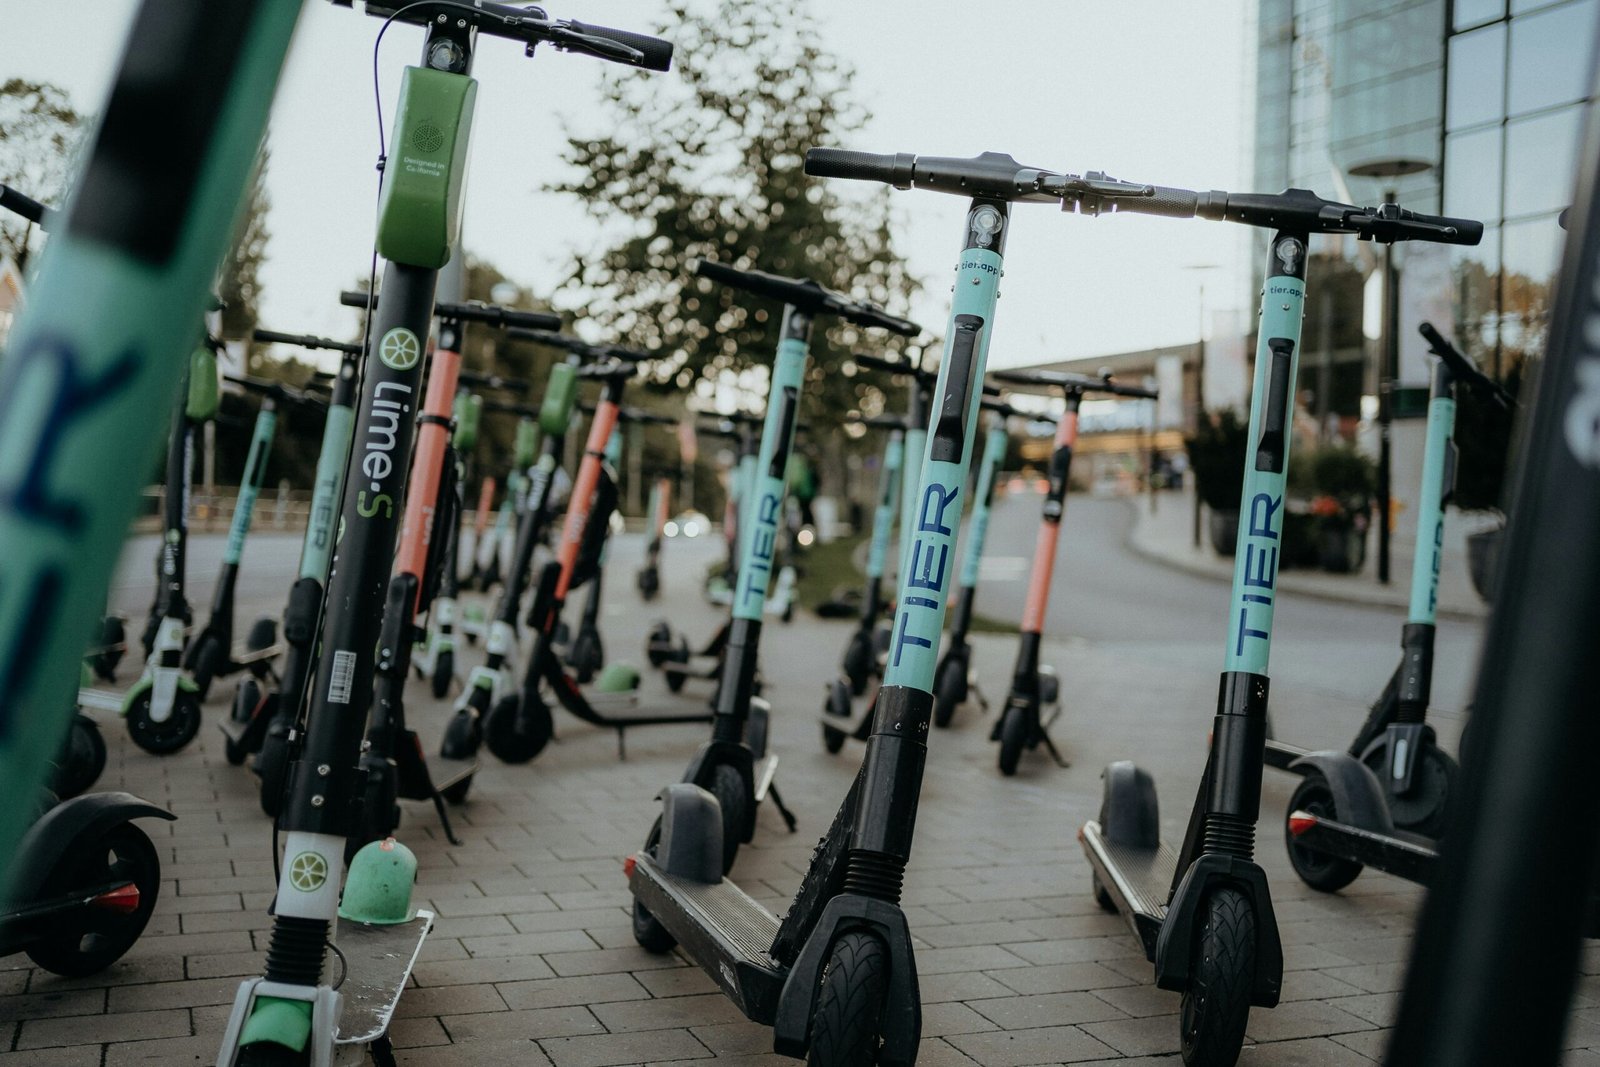 Can I Use An Electric Scooter For Recreational Purposes Like Group Rides And Events?